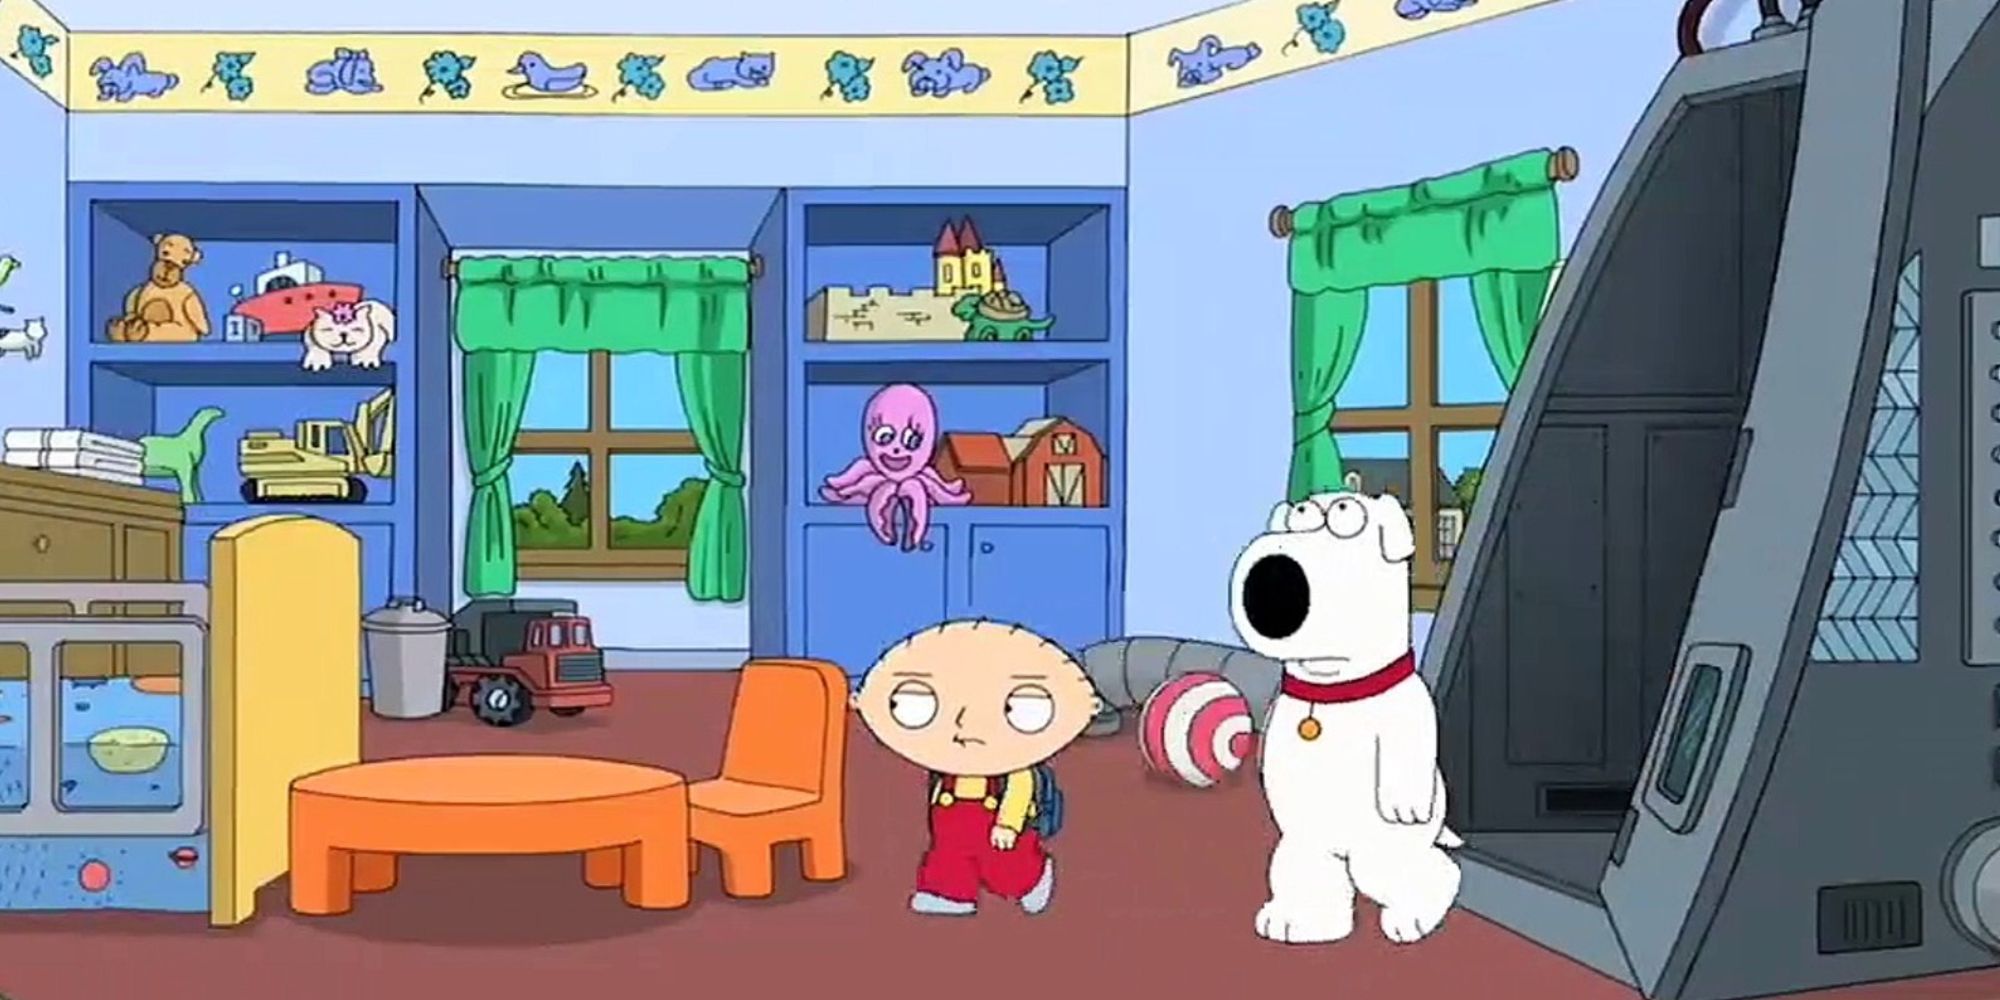 Family Guy's Top 10 Episodes All Share The Same Thing In Common (Except 1)